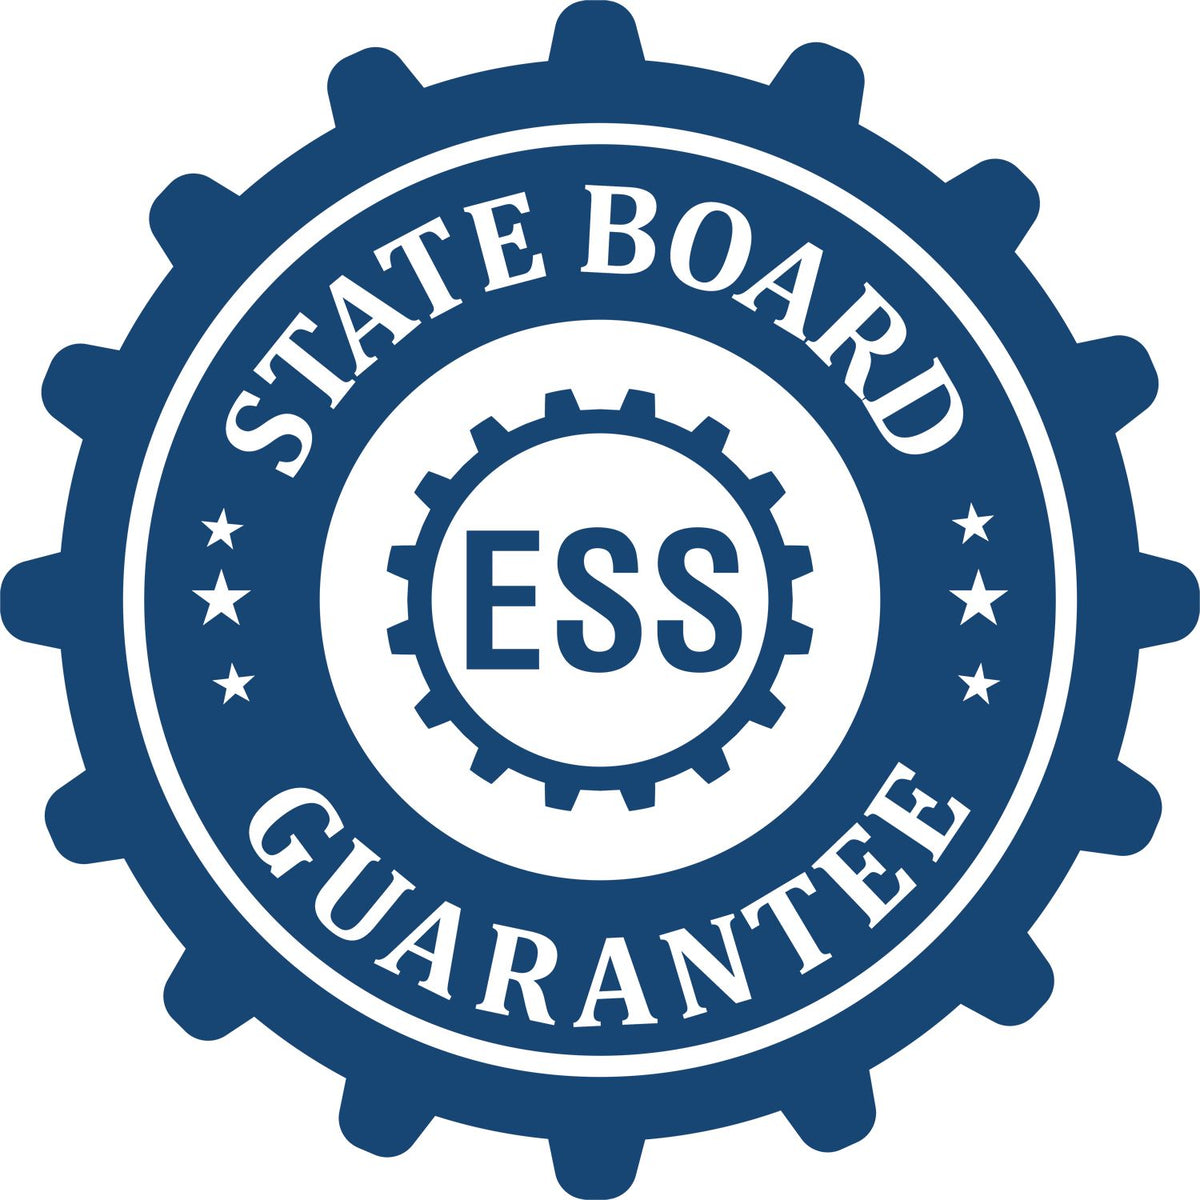 An emblem in a gear shape illustrating a state board guarantee for the Digital Washington Landscape Architect Stamp product.